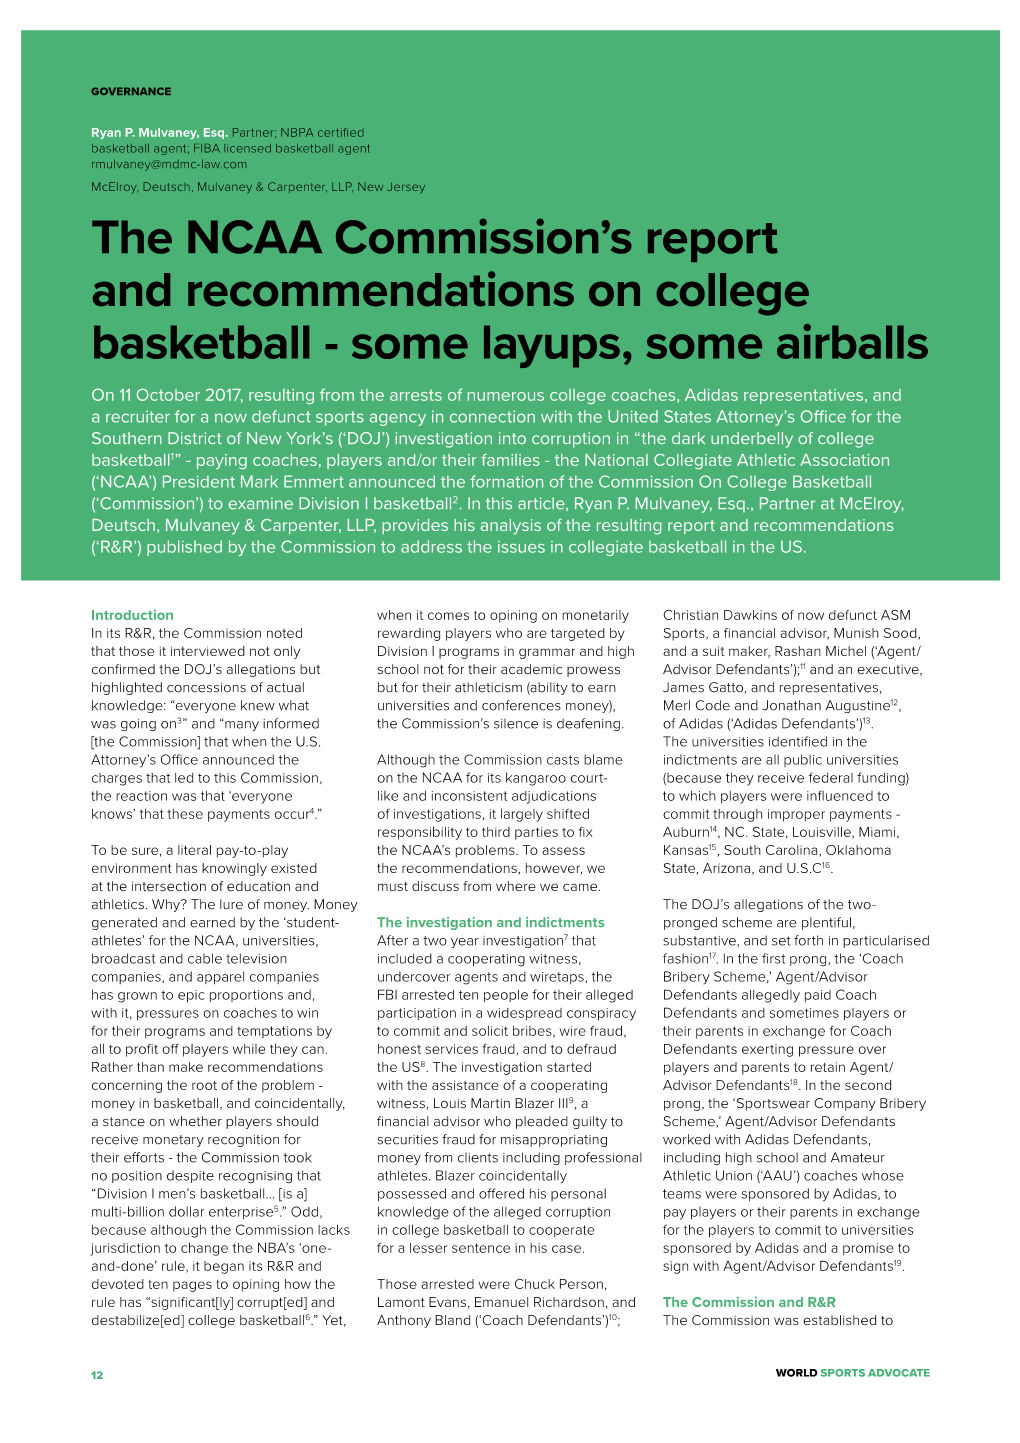 "The NCAA Commission's Report and Recommendations on College Basketball